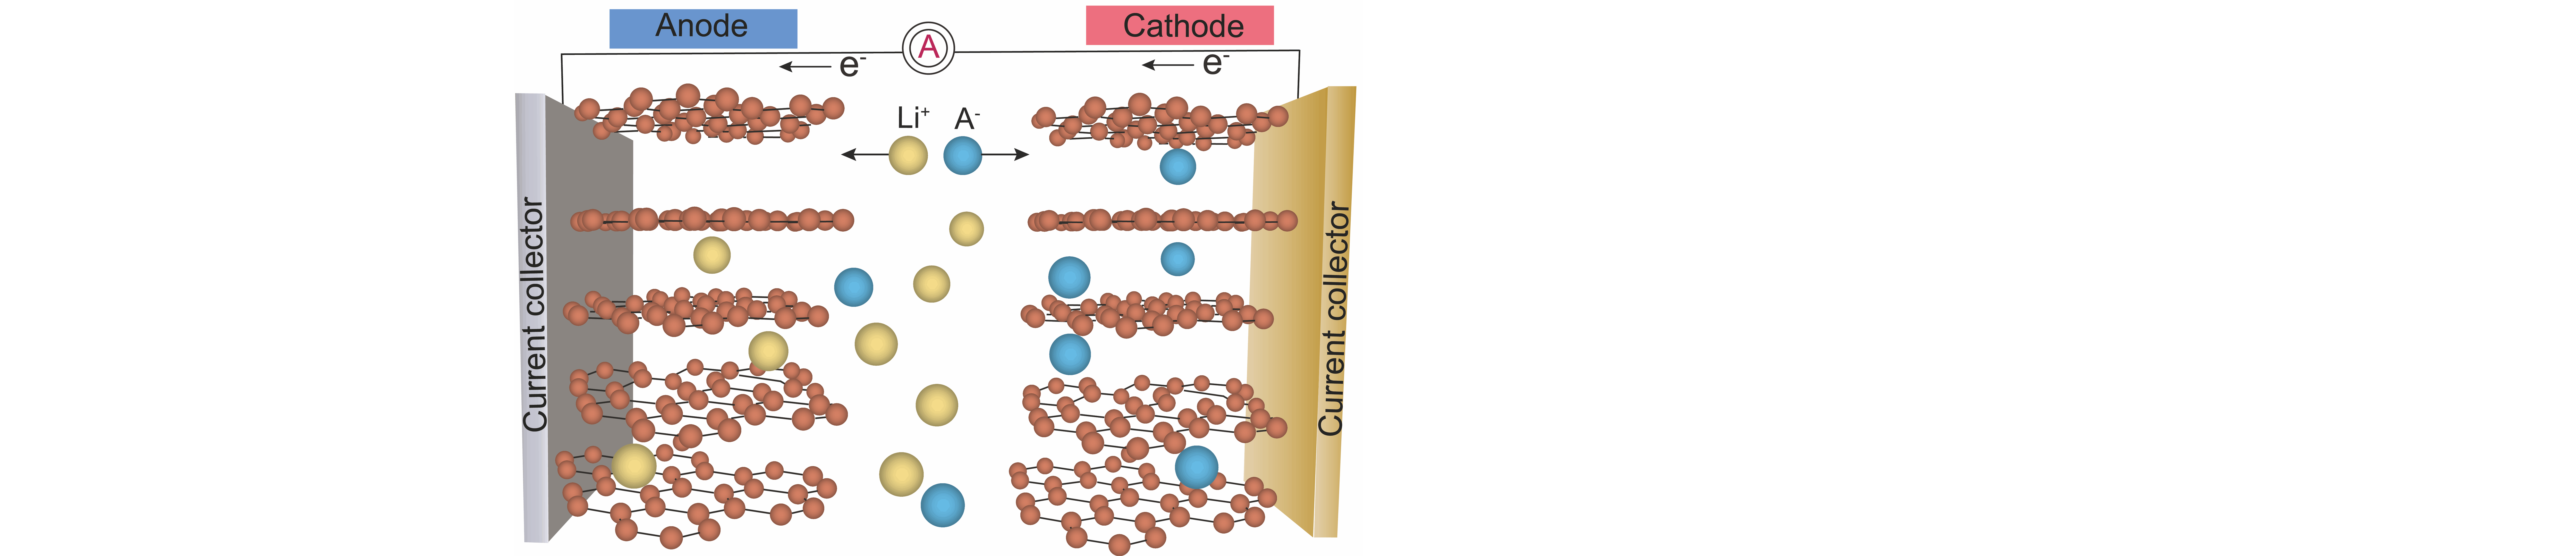 Rechargeable Dual-ion Batteries with Graphite as a Cathode: Key Challenges and Opportunities